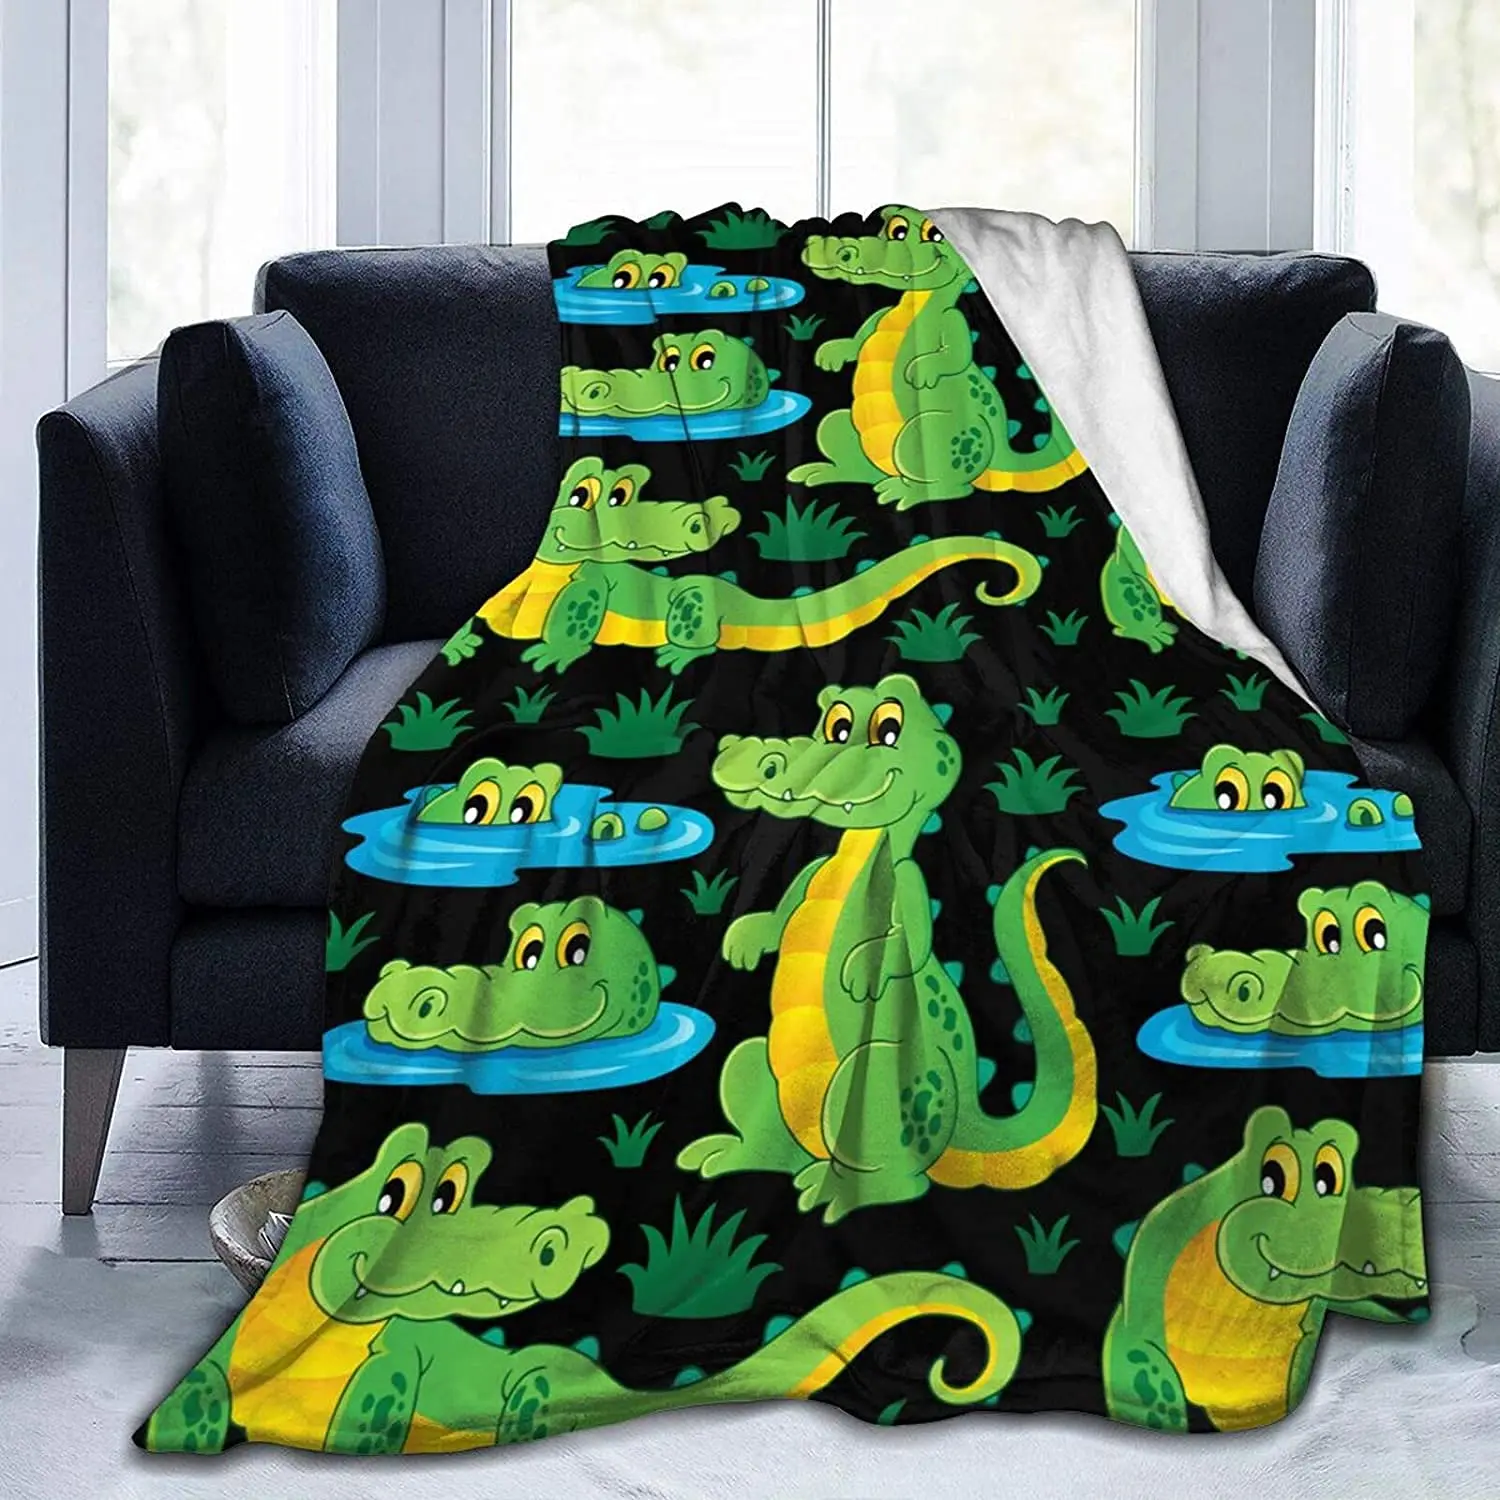 Microplush Flannel Fleece Throws Blanket For Bed Sofa Couch Bedroom Decor Bedding Birthday Gifts Idea For Boys